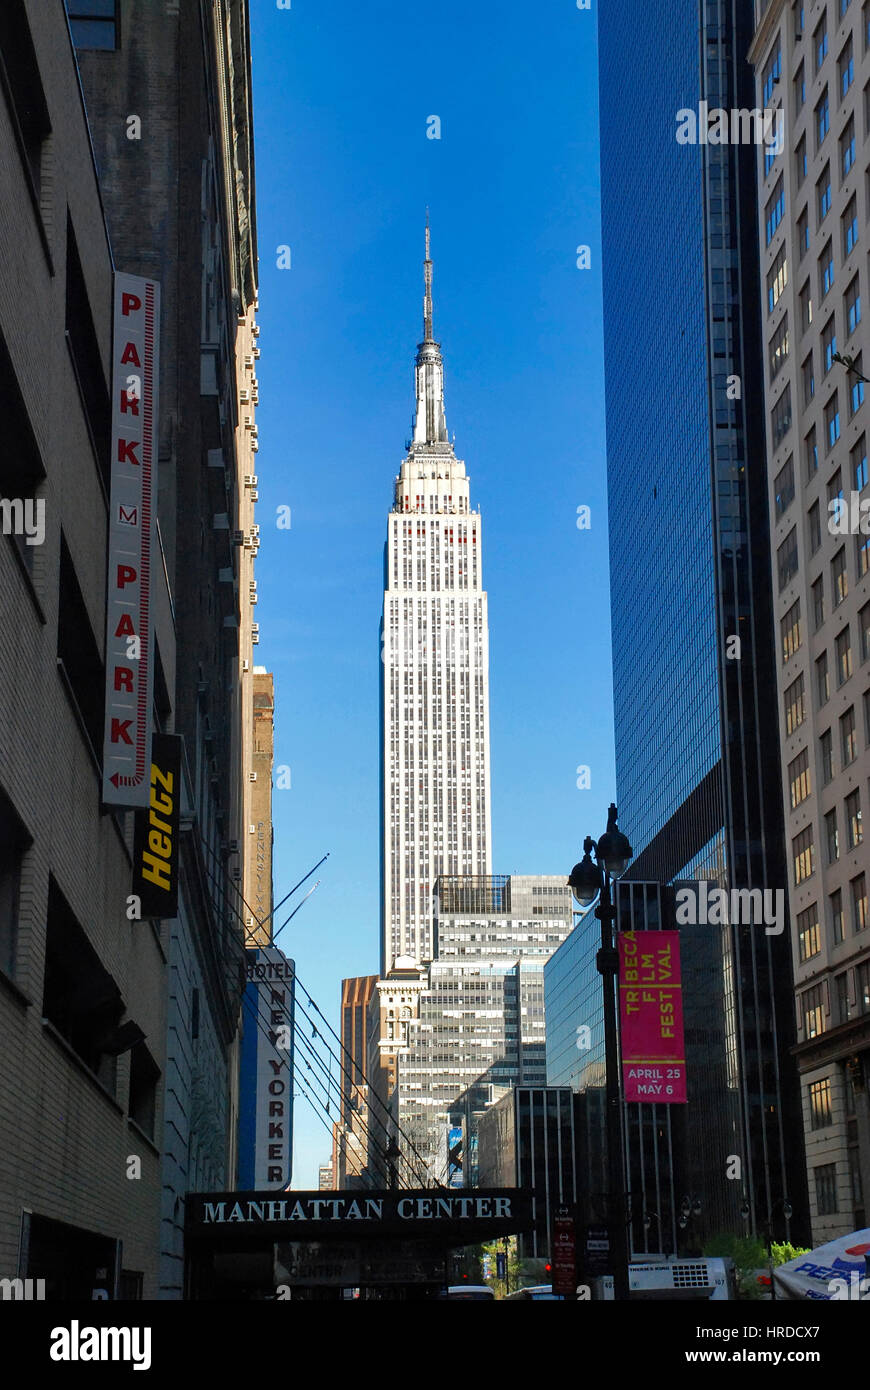 Empire State Building, skyscraper located on Fifth Avenue between West 33rd and 34th Streets in Midtown, Manhattan, New York City. Stock Photo